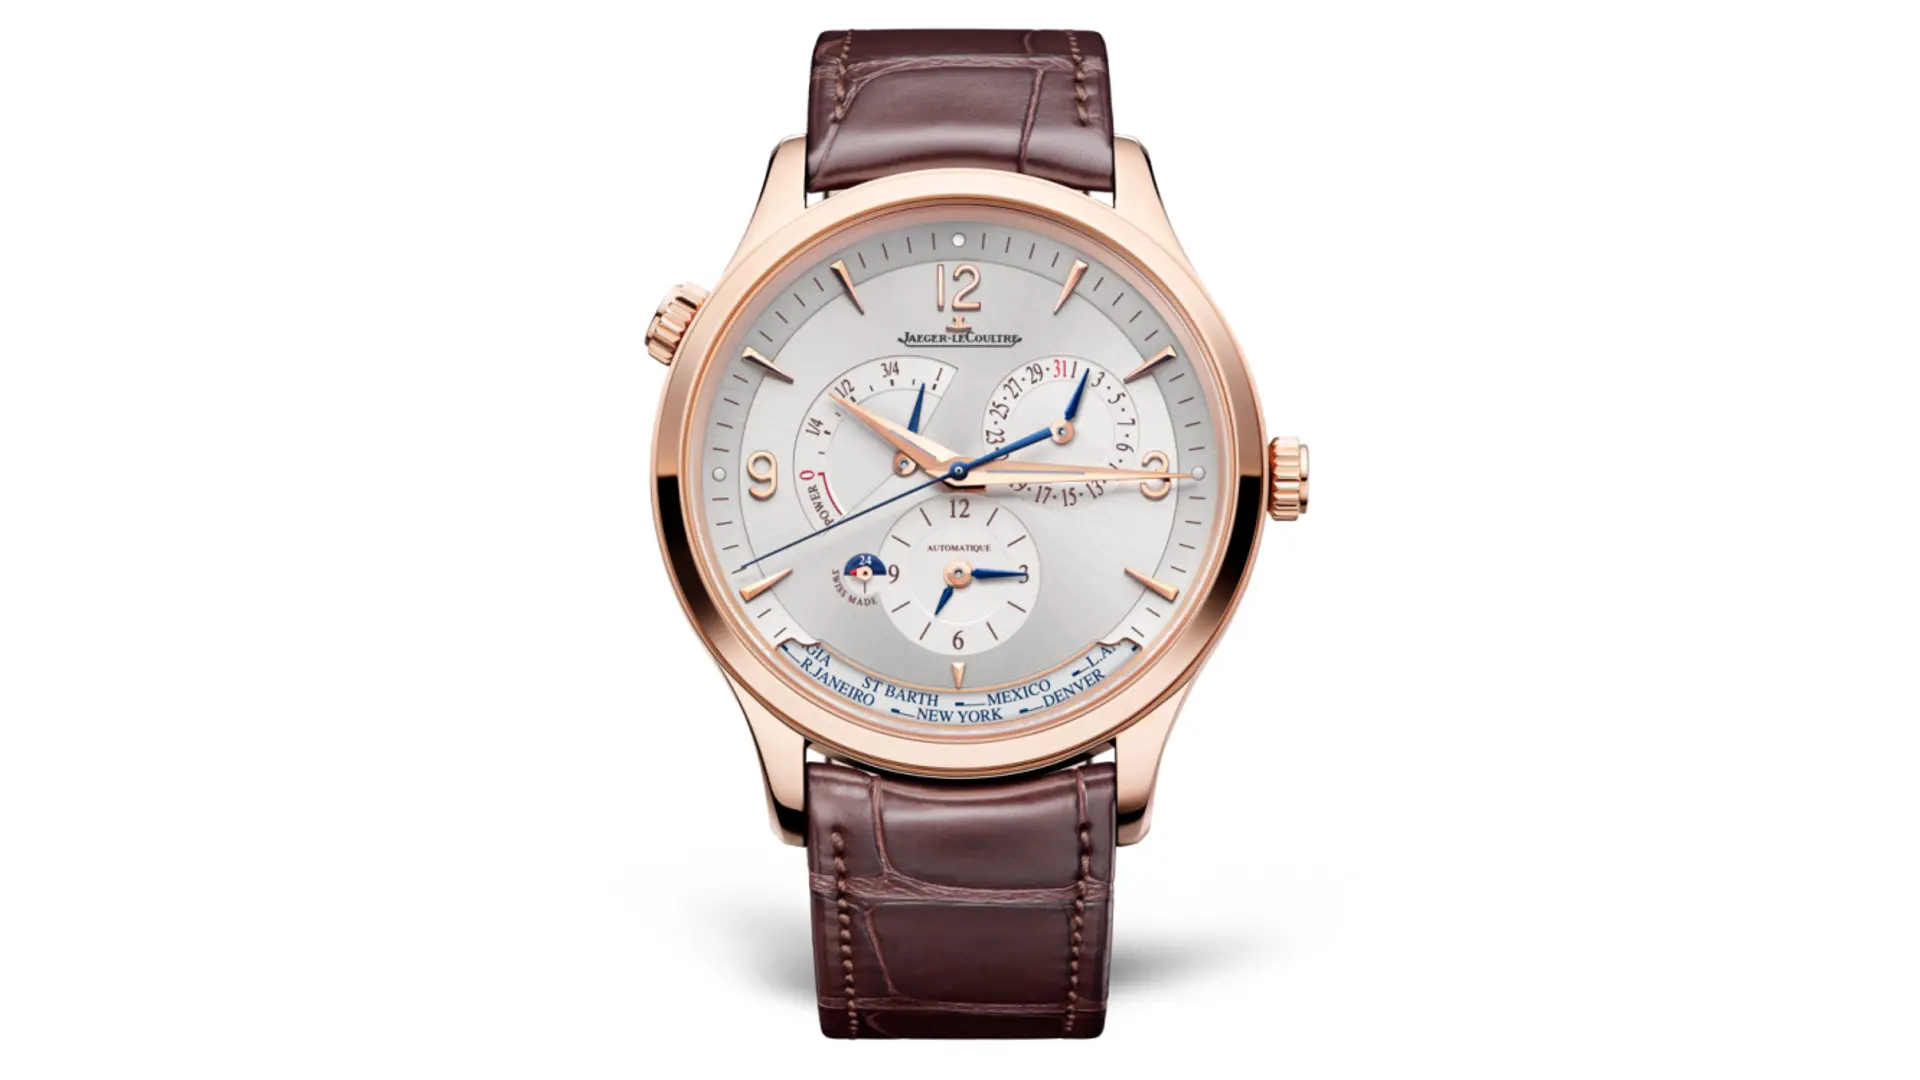 Lifestyle Articles - Ten of the Best Travel Watches - 7